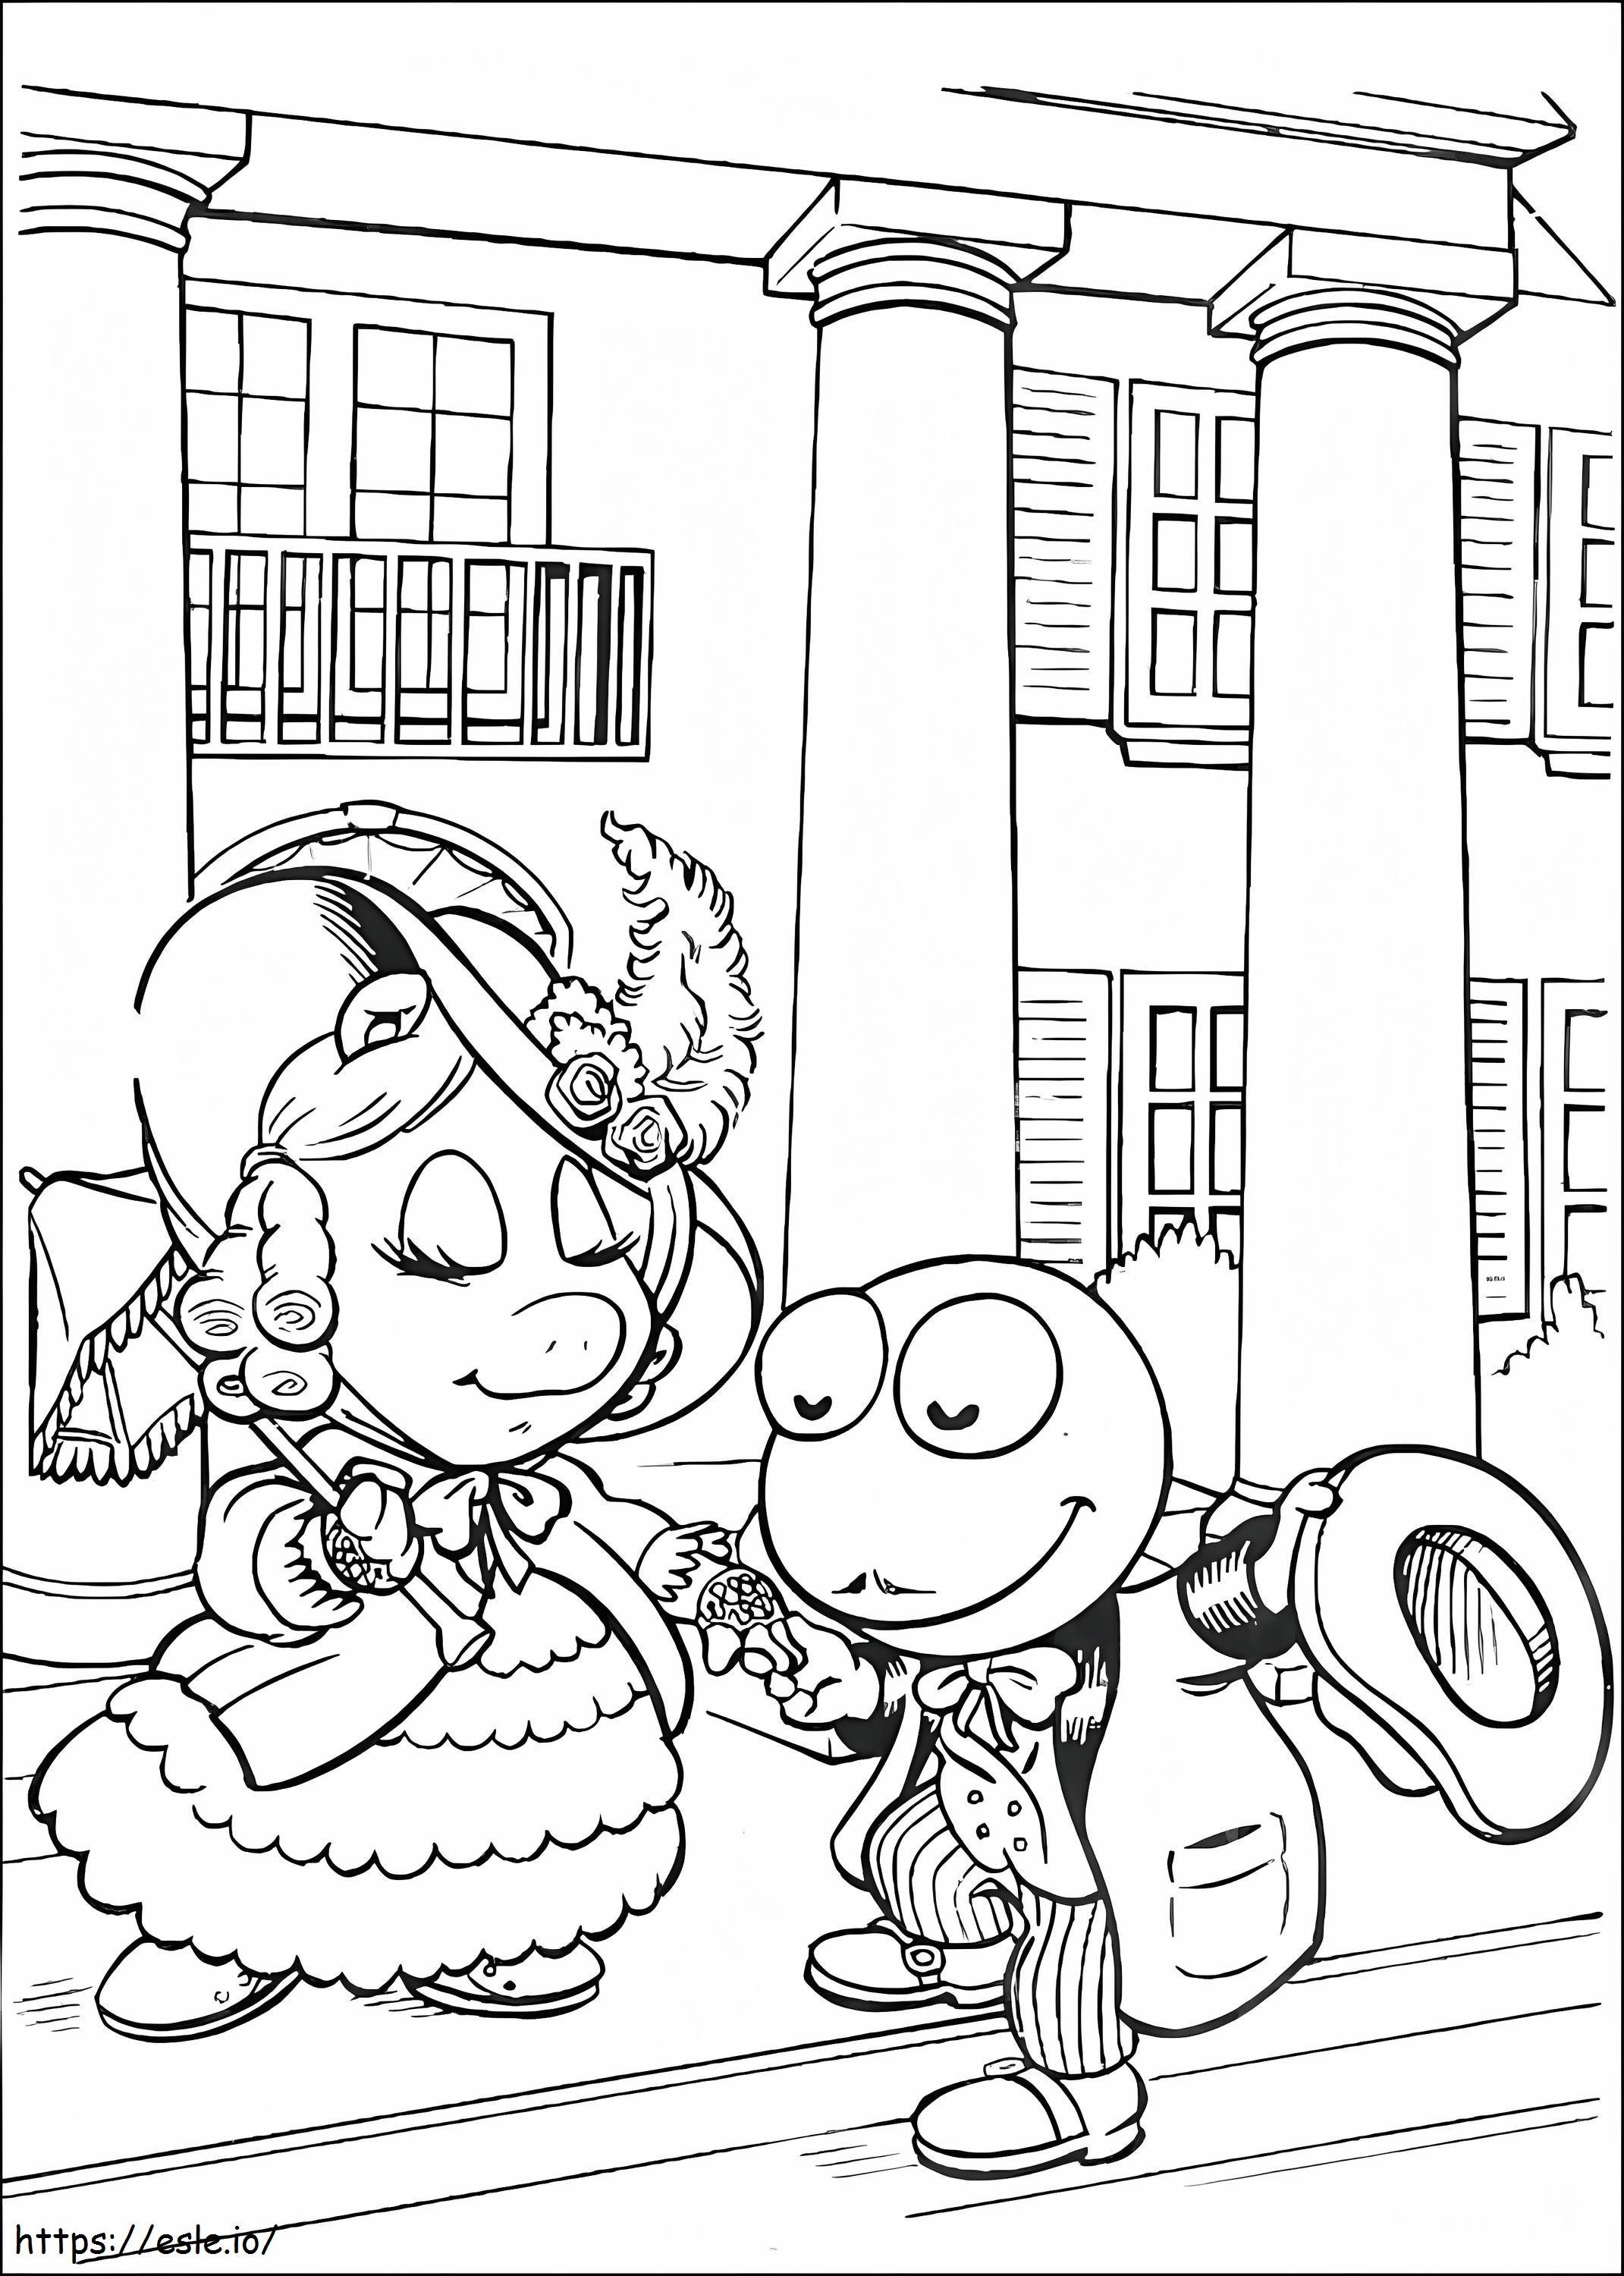 Baby Miss Piggy And Kermit From Muppet Babies coloring page